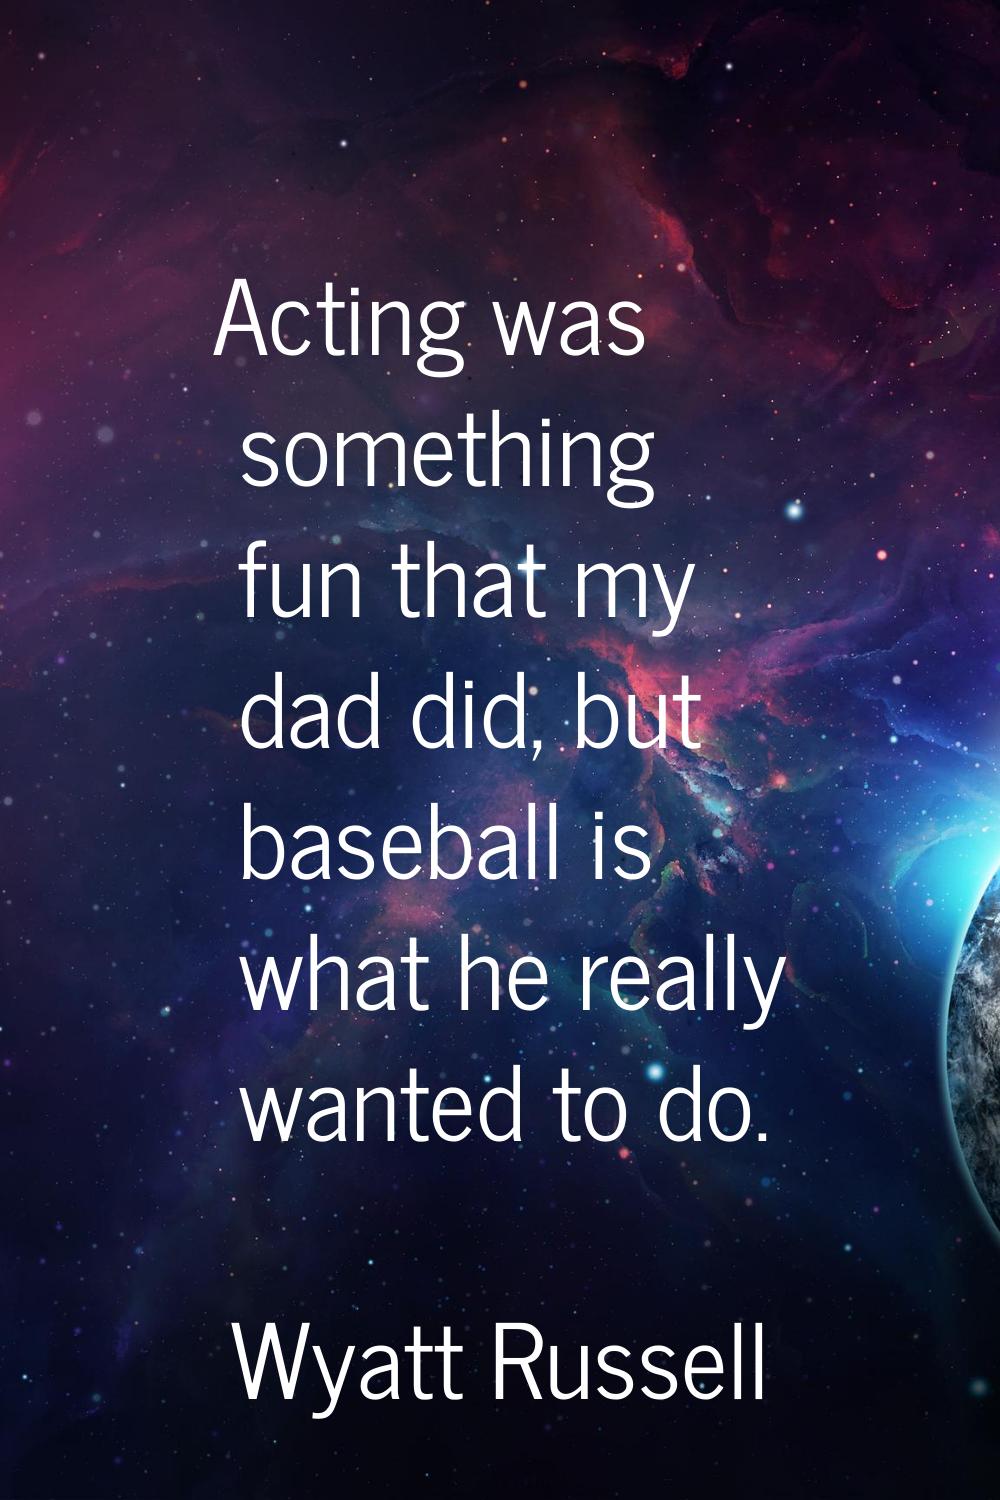 Acting was something fun that my dad did, but baseball is what he really wanted to do.